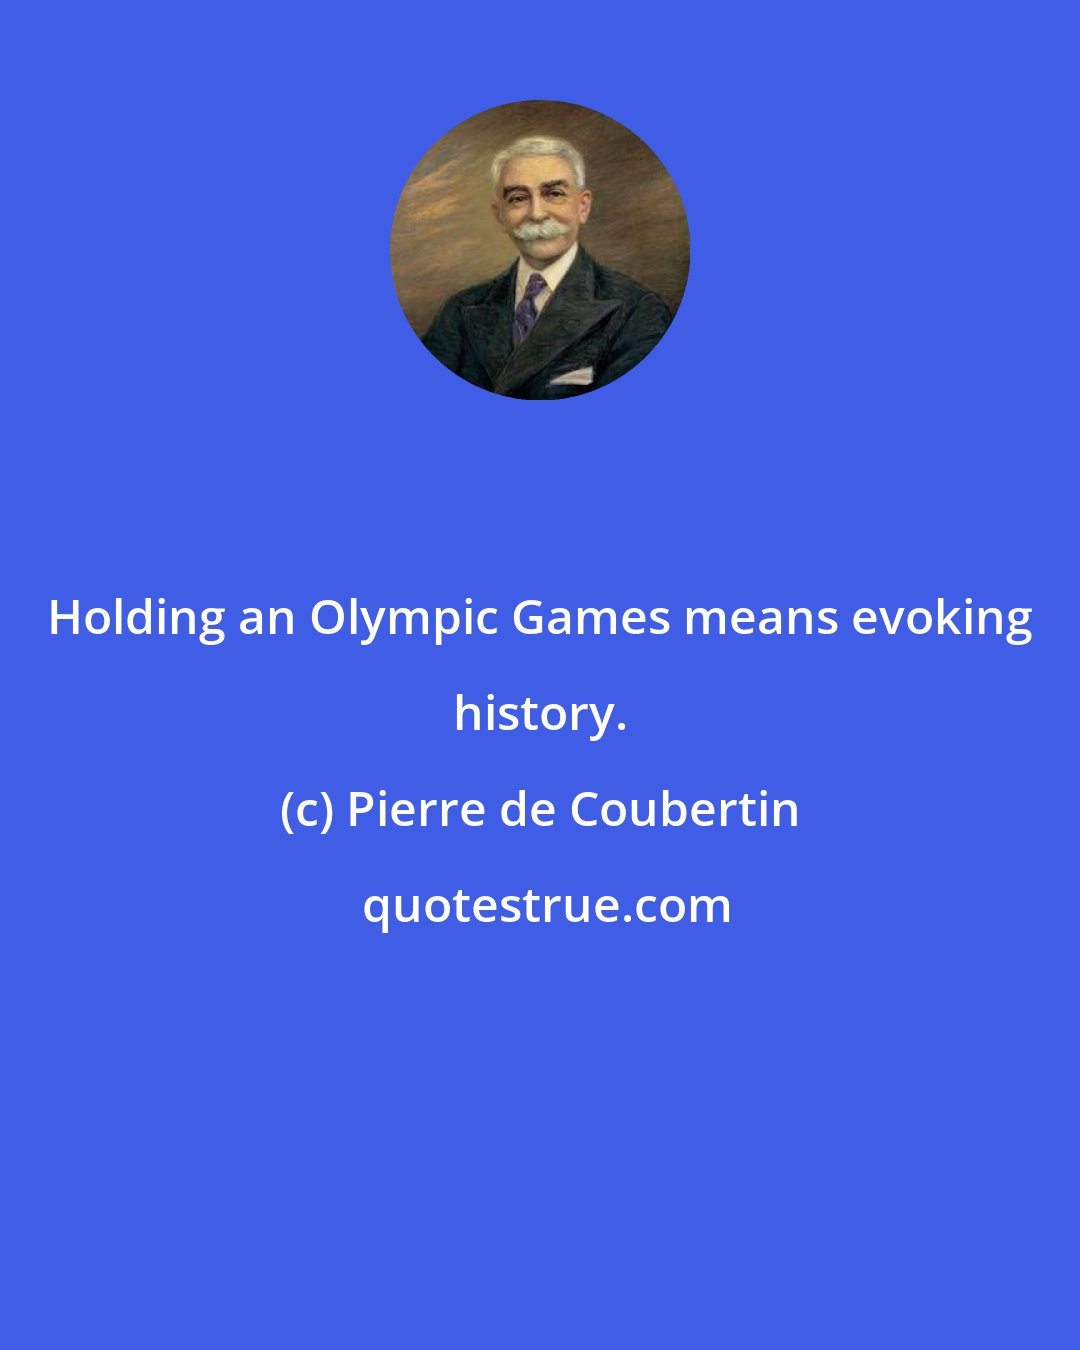 Pierre de Coubertin: Holding an Olympic Games means evoking history.